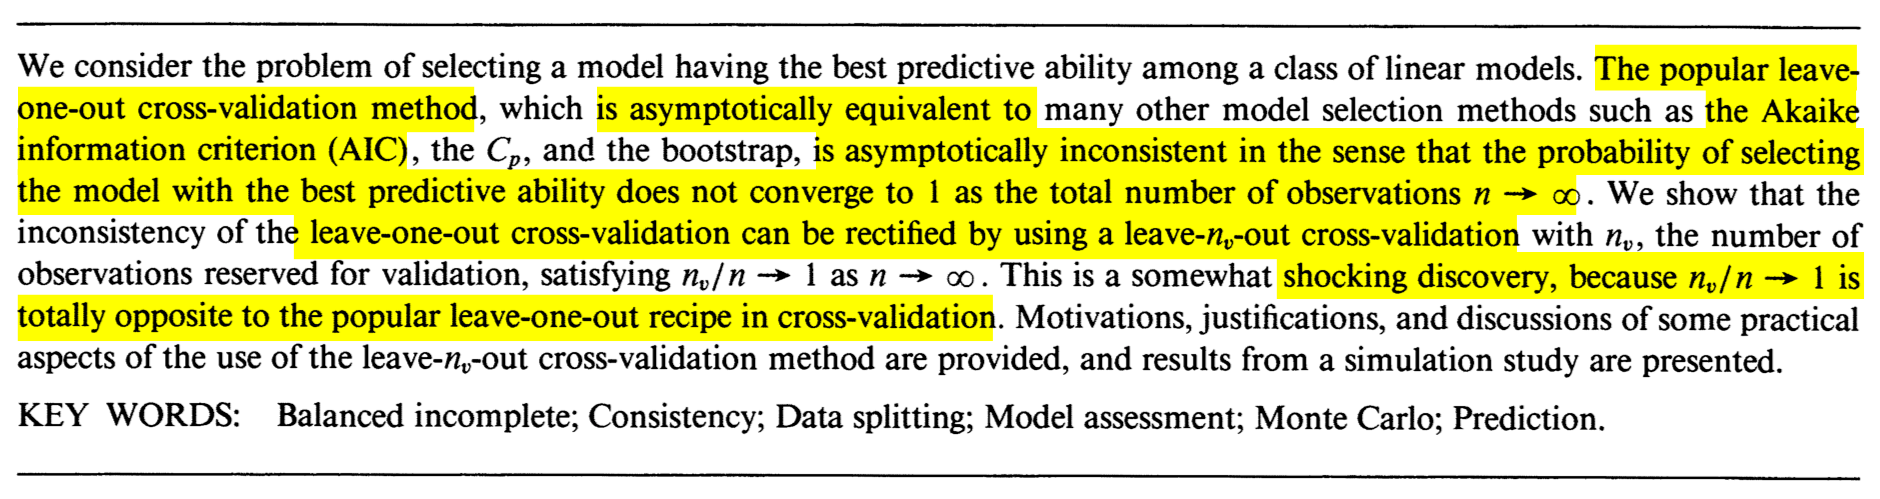 The abstract of Jun Shao’s Linear model selection by cross-validation (Shao 1993).